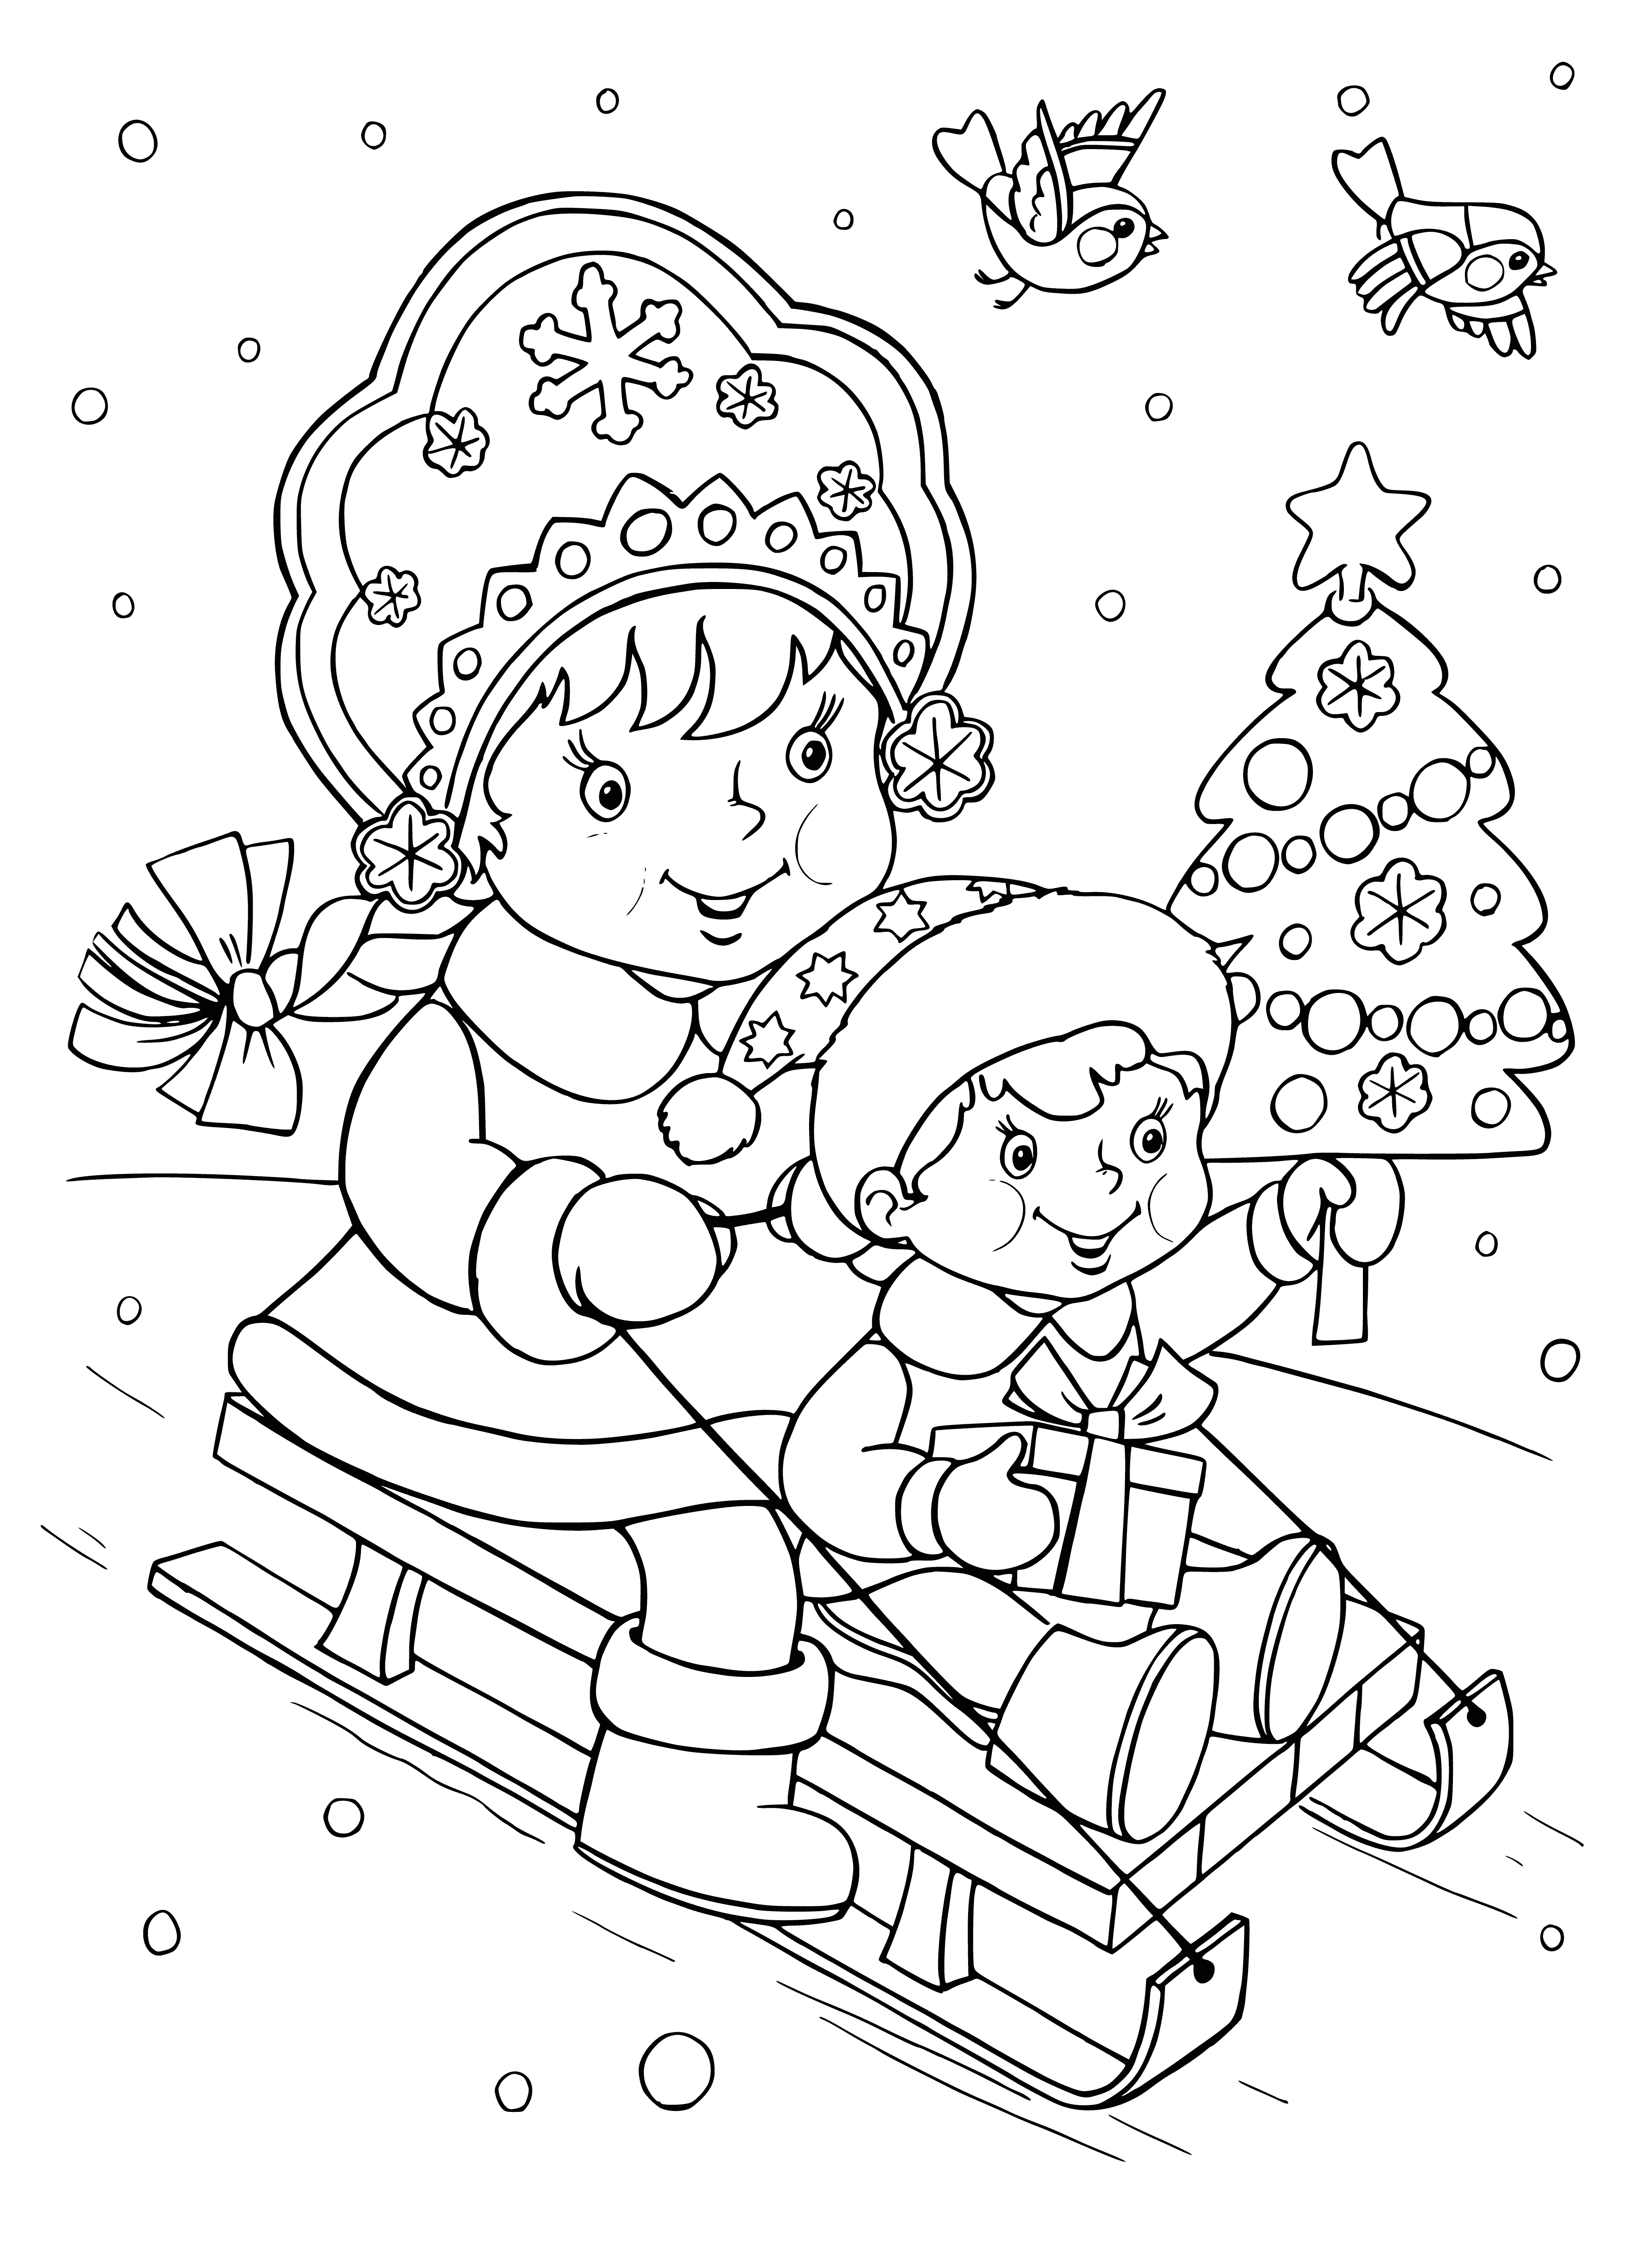 coloring page: Girl sledding, wearing a scarf and hat, smiles with joy.